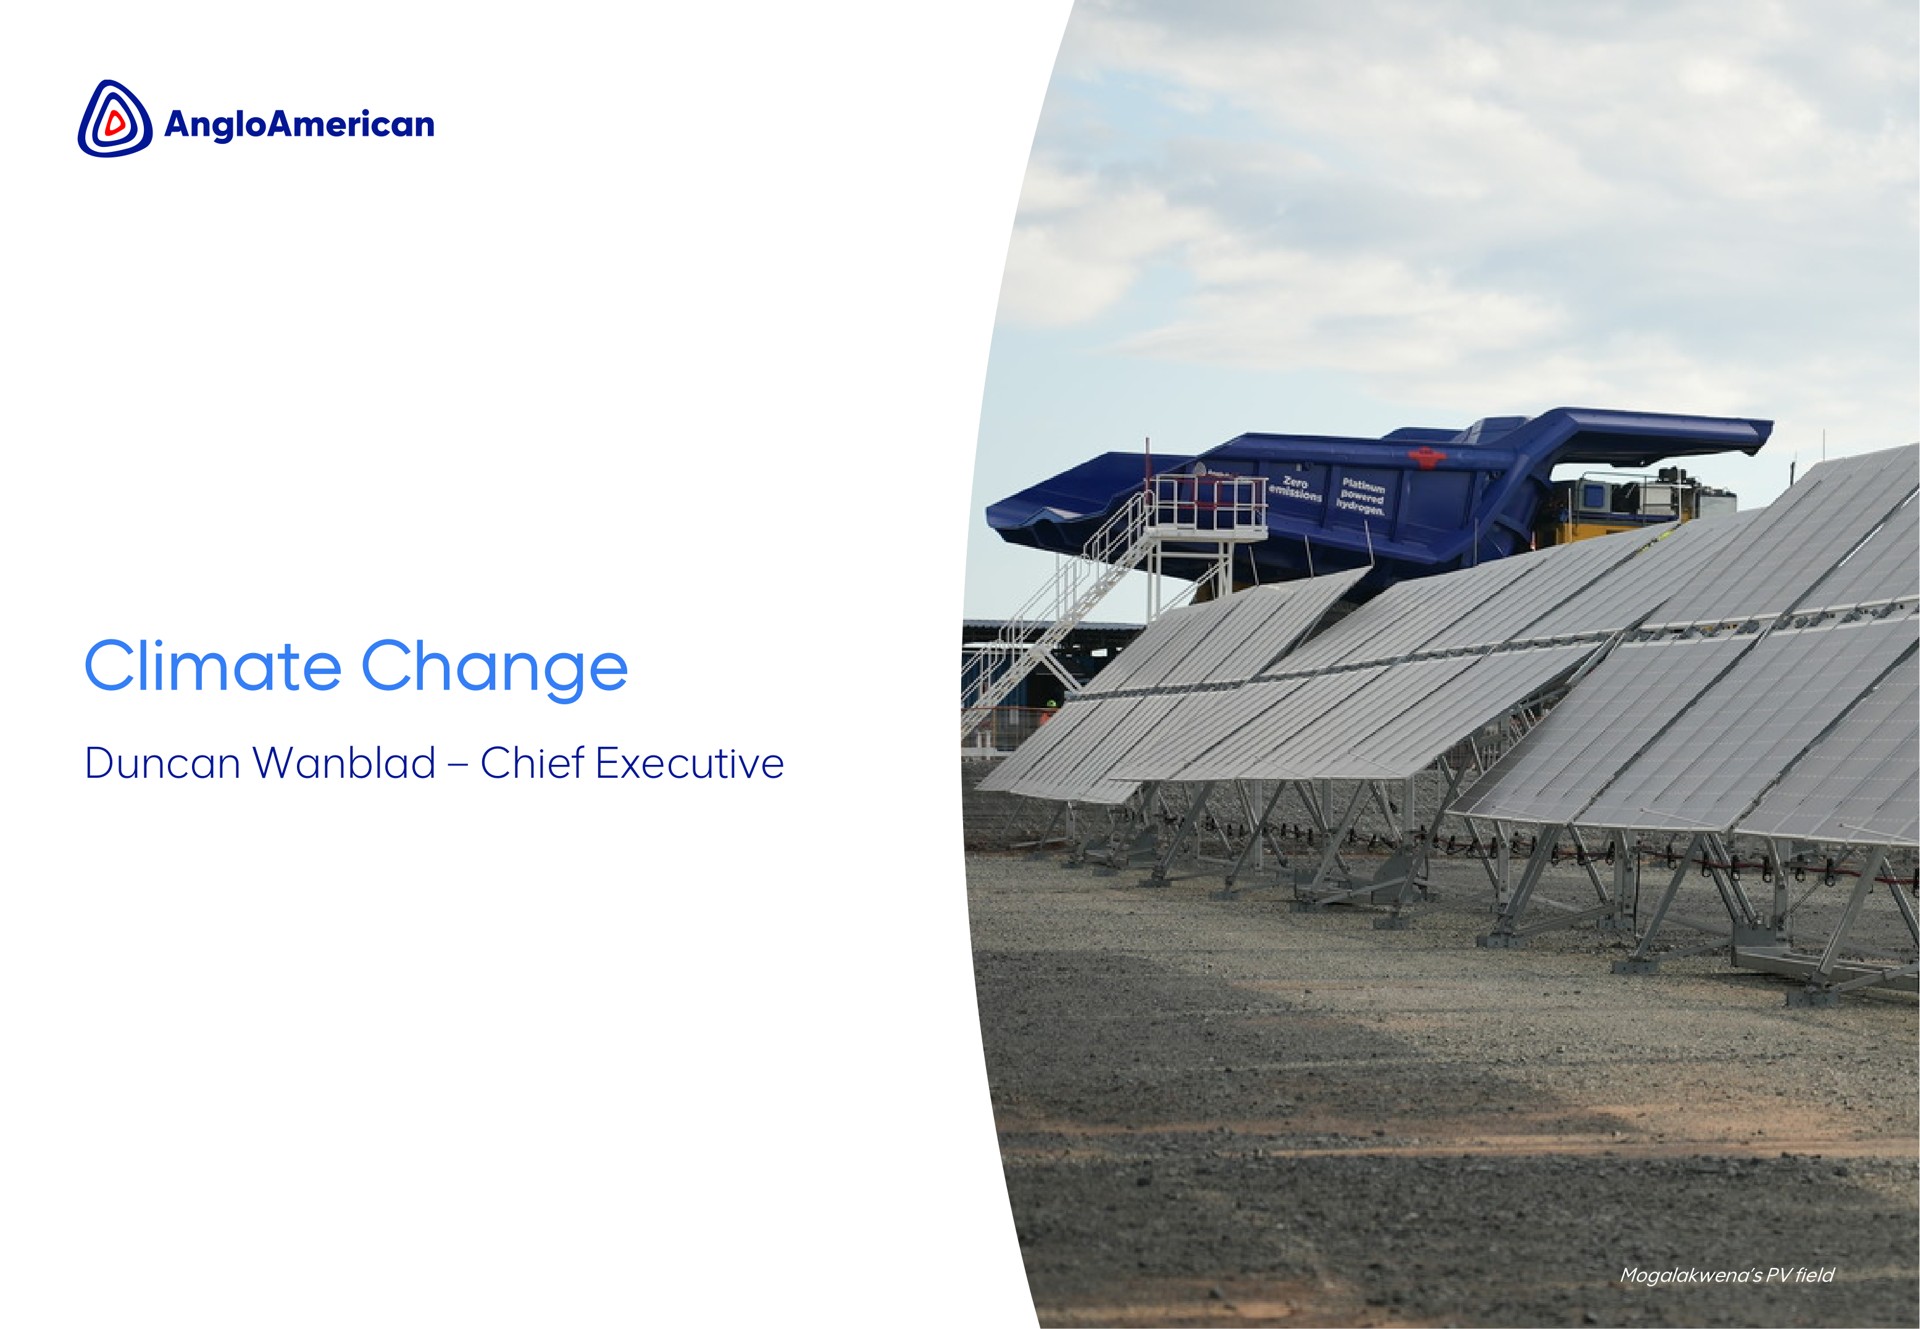 climate change | AngloAmerican